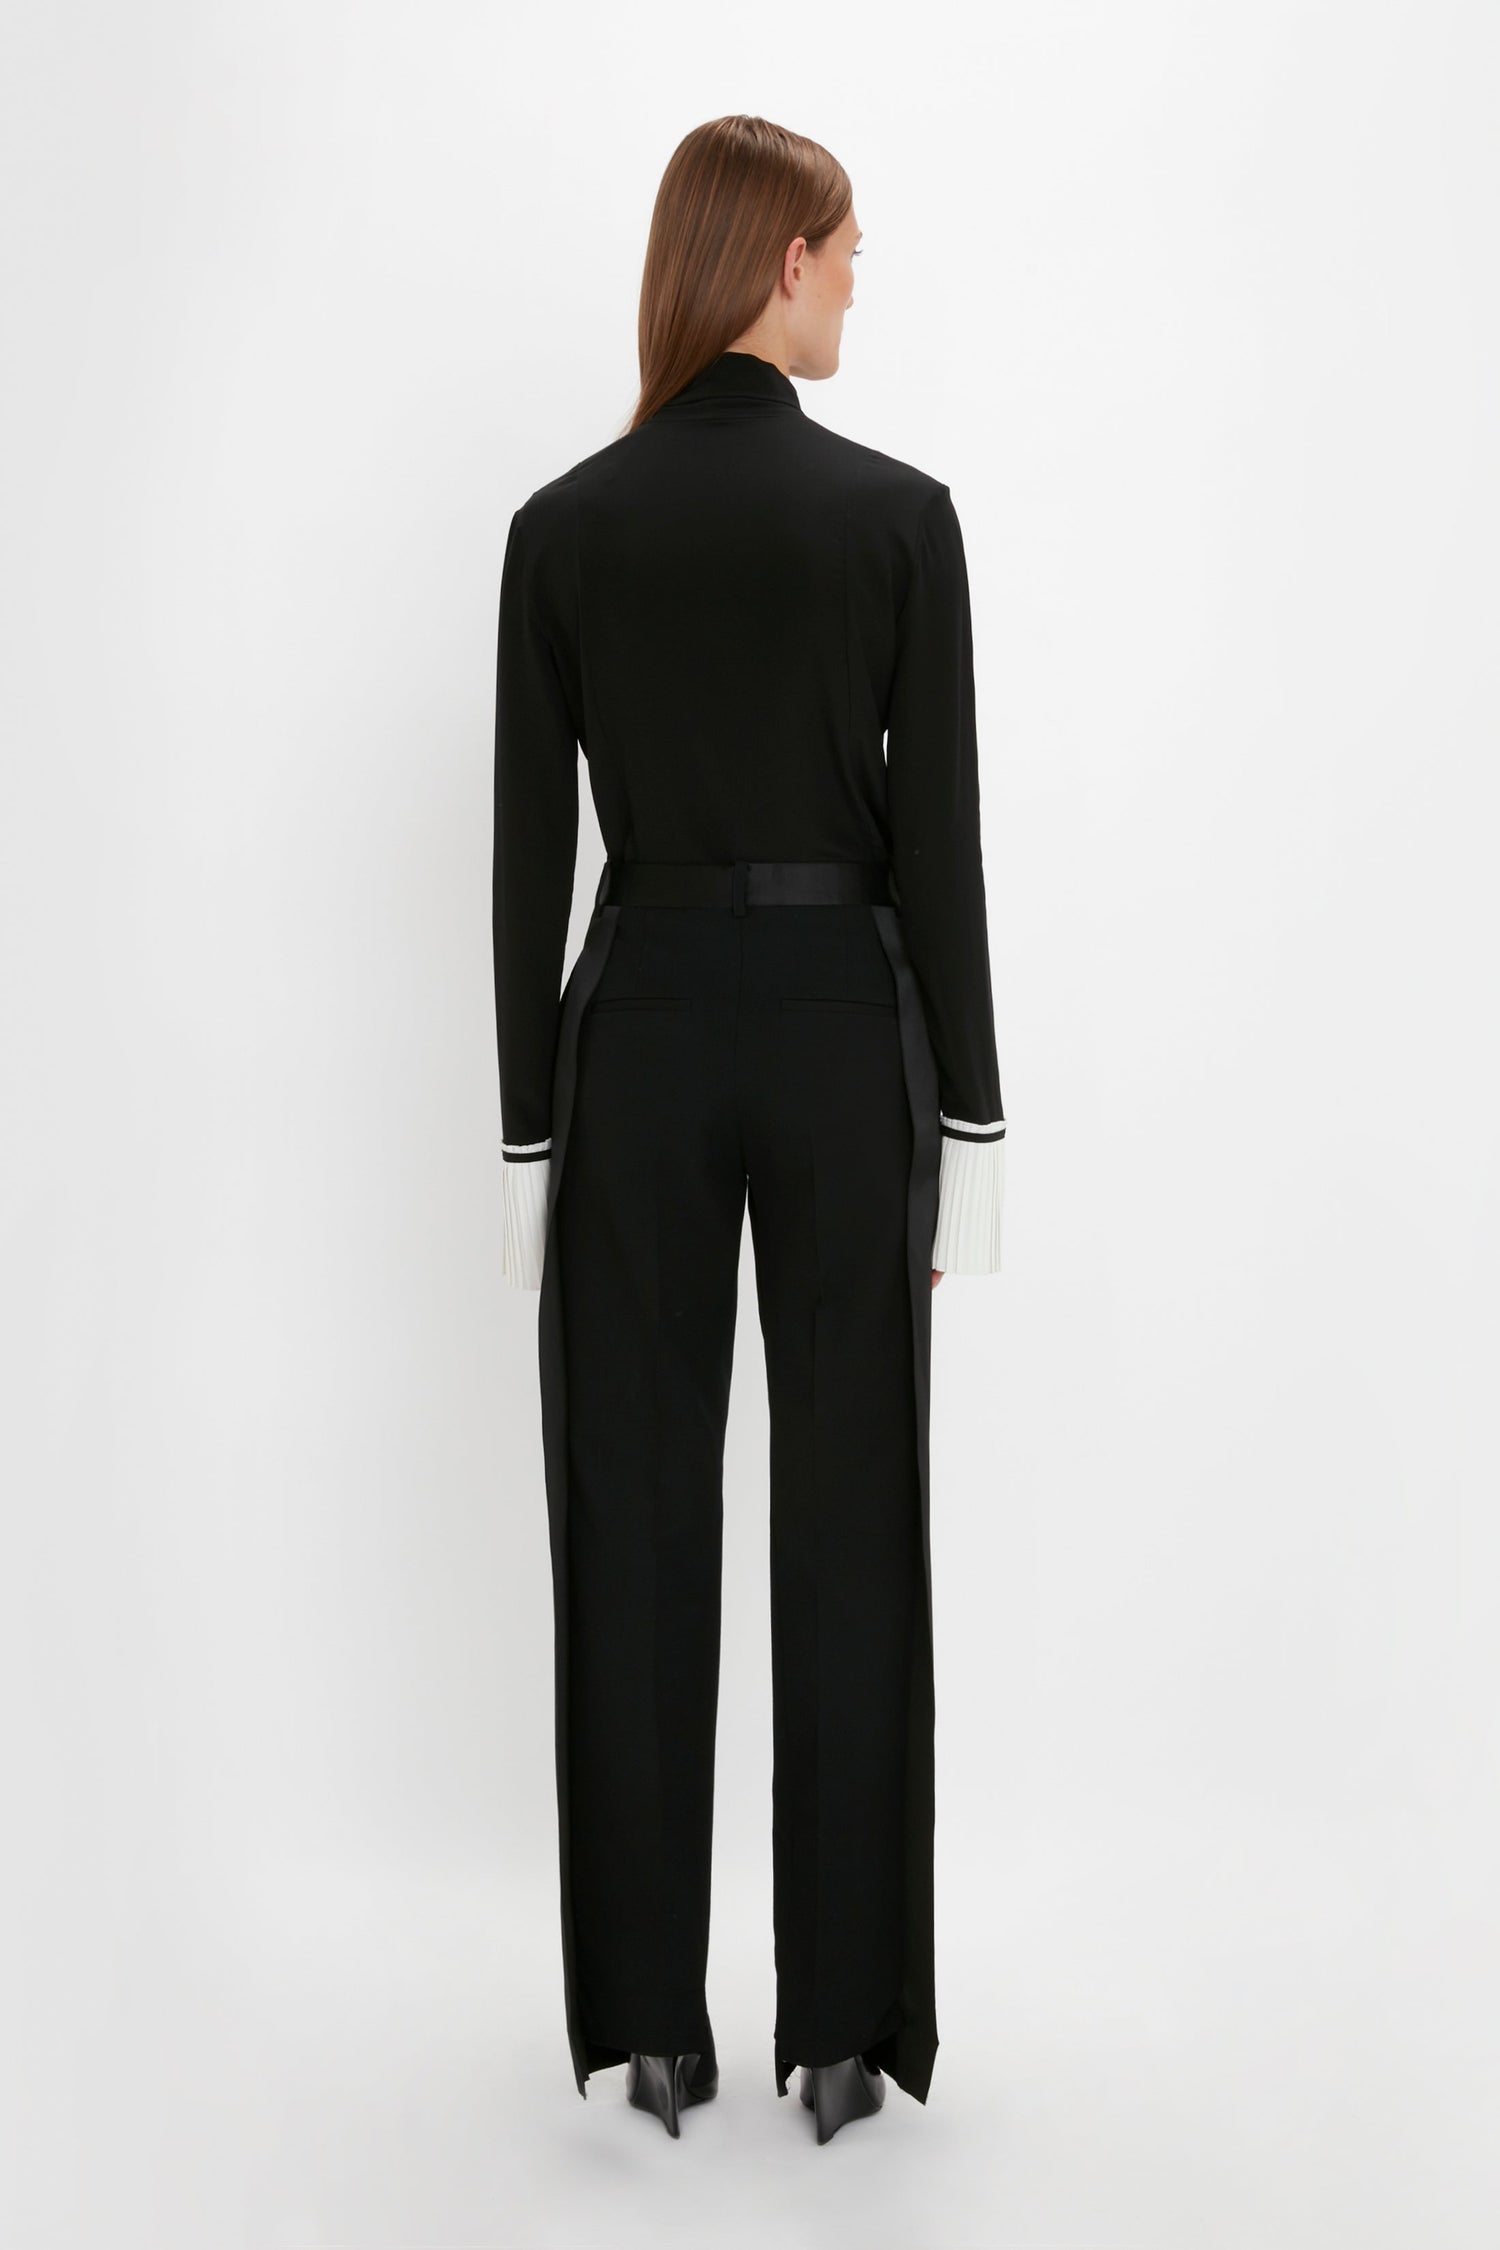 A person stands with their back to the camera, wearing a Pleat Cuff Blouse In Black and black trousers with white knife pleat cuffs by Victoria Beckham.